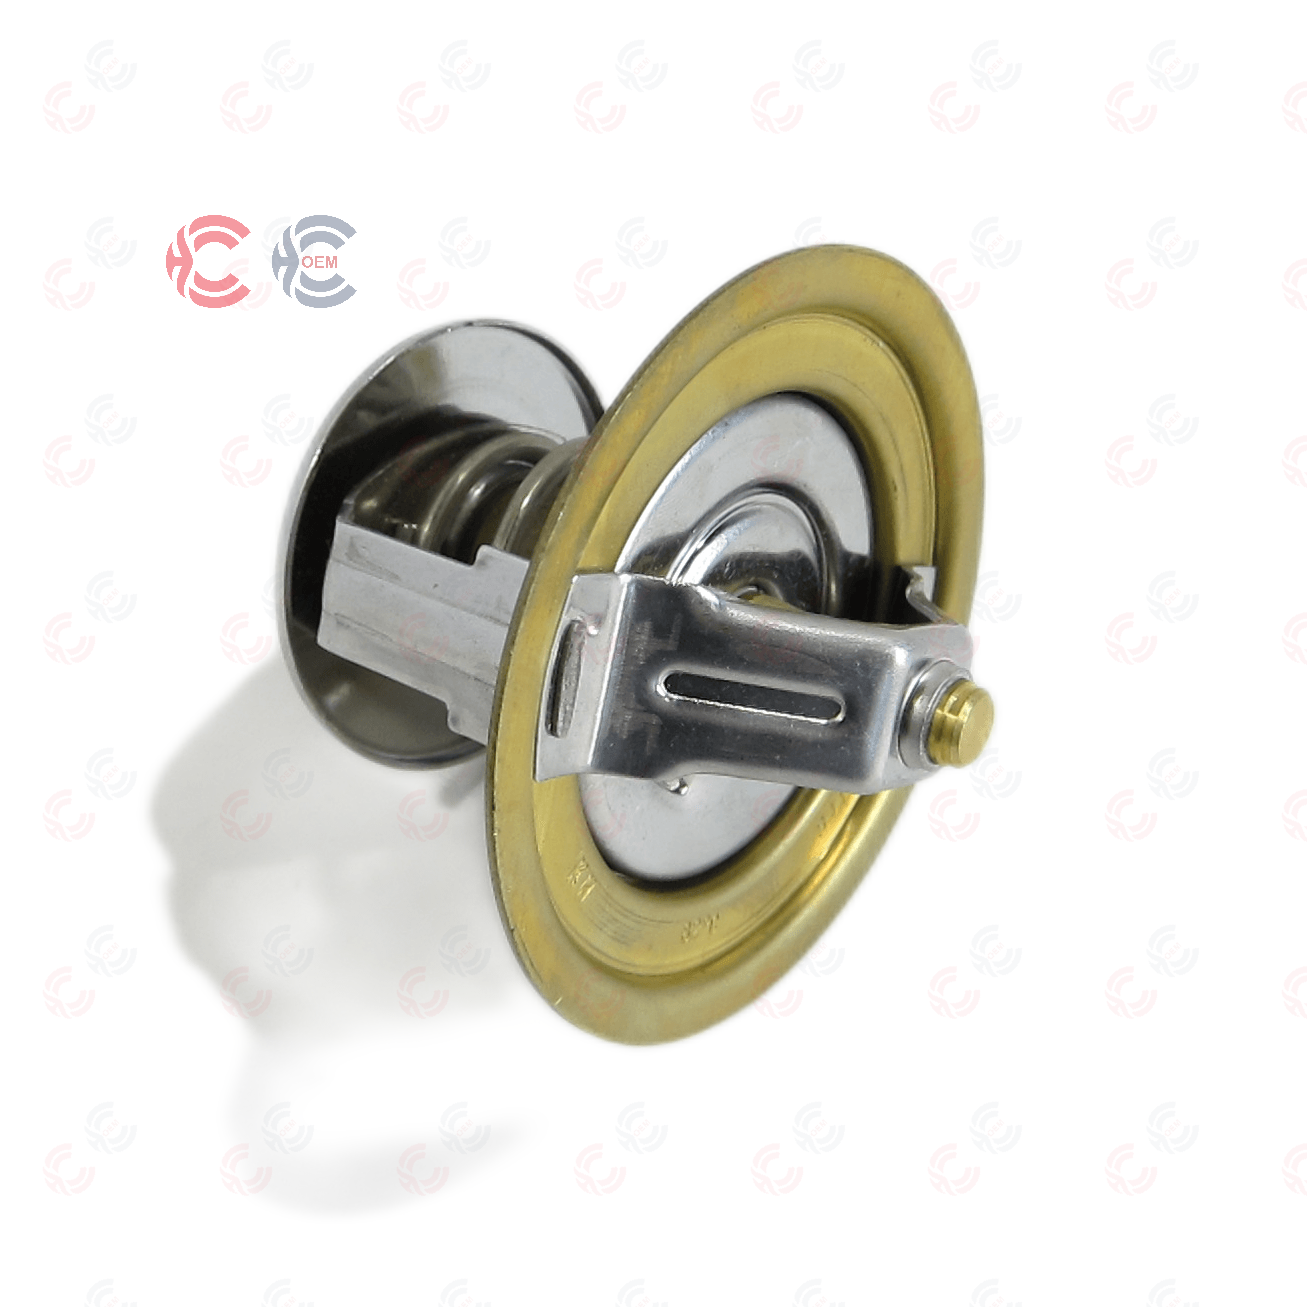 OEM: 25520-72010Material: ABS MetalColor: black silver goldenOrigin: Made in ChinaWeight: 200gPacking List: 1* Thermostat More ServiceWe can provide OEM Manufacturing serviceWe can Be your one-step solution for Auto PartsWe can provide technical scheme for you Feel Free to Contact Us, We will get back to you as soon as possible.